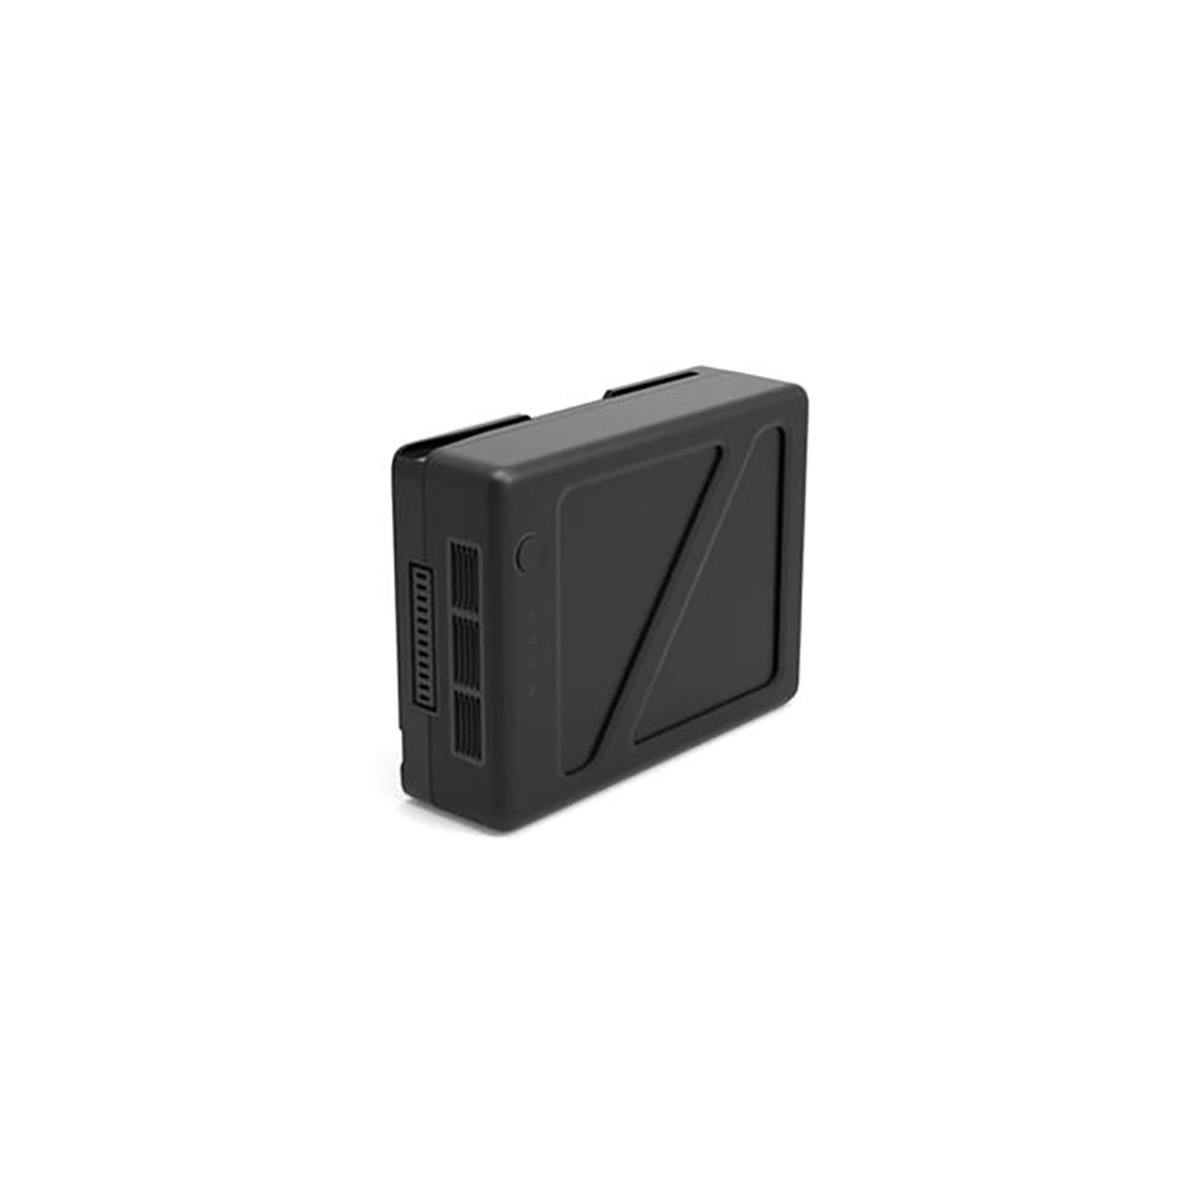 DJI Part 7 TB50 4280mAh Intelligent Battery for Ronin 2 3-Axis Gimbal -  CP.ZM.00000040.01